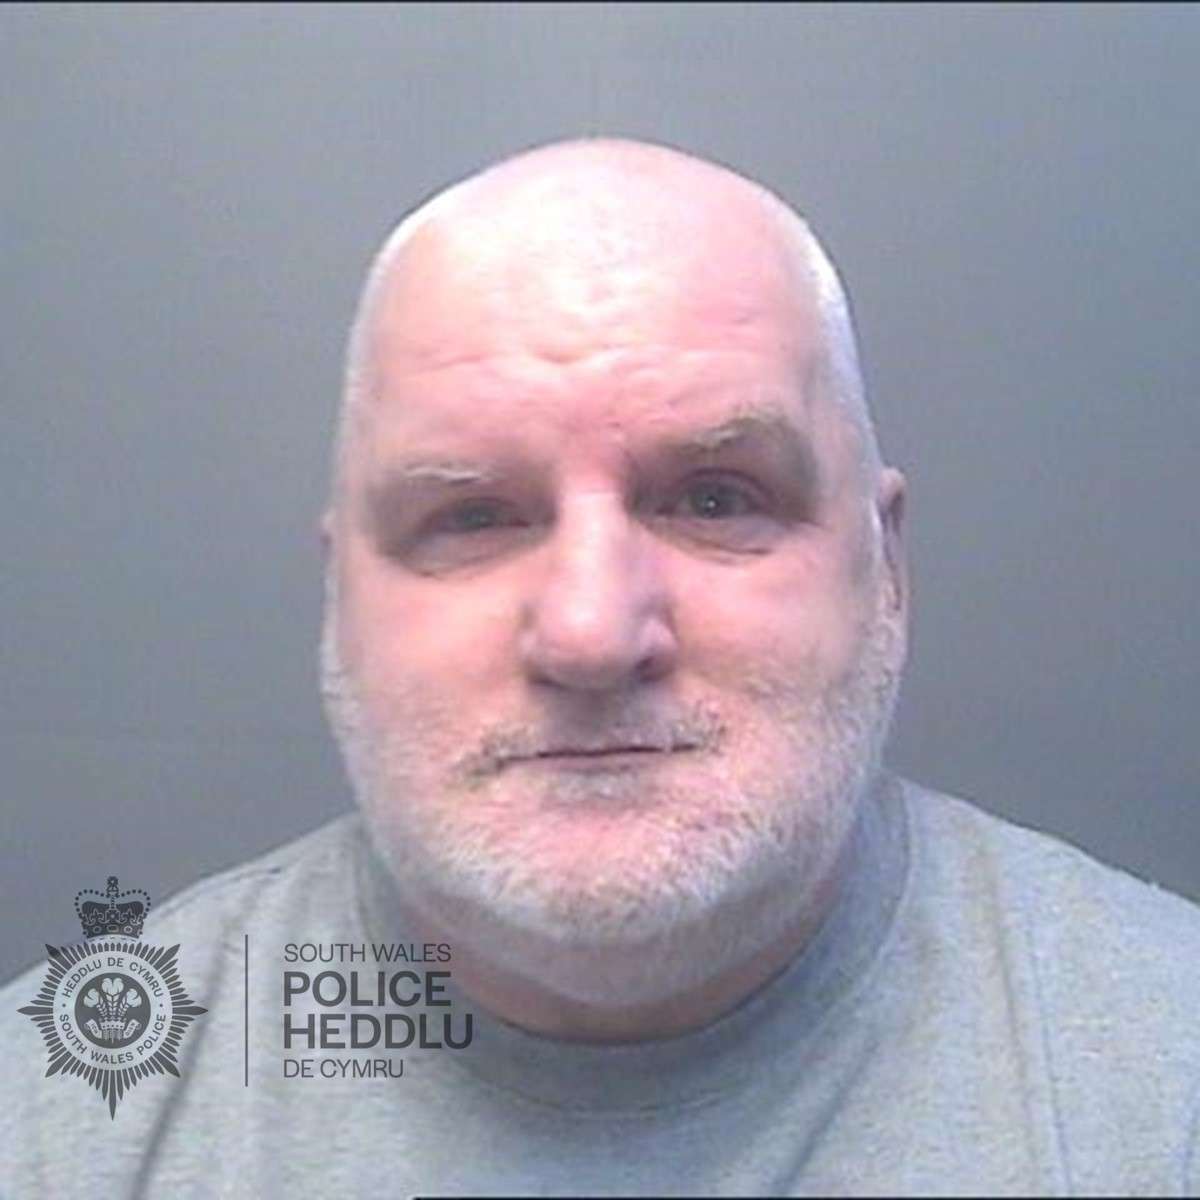 Swansea man sentenced for 16 years for multiple child sex offences